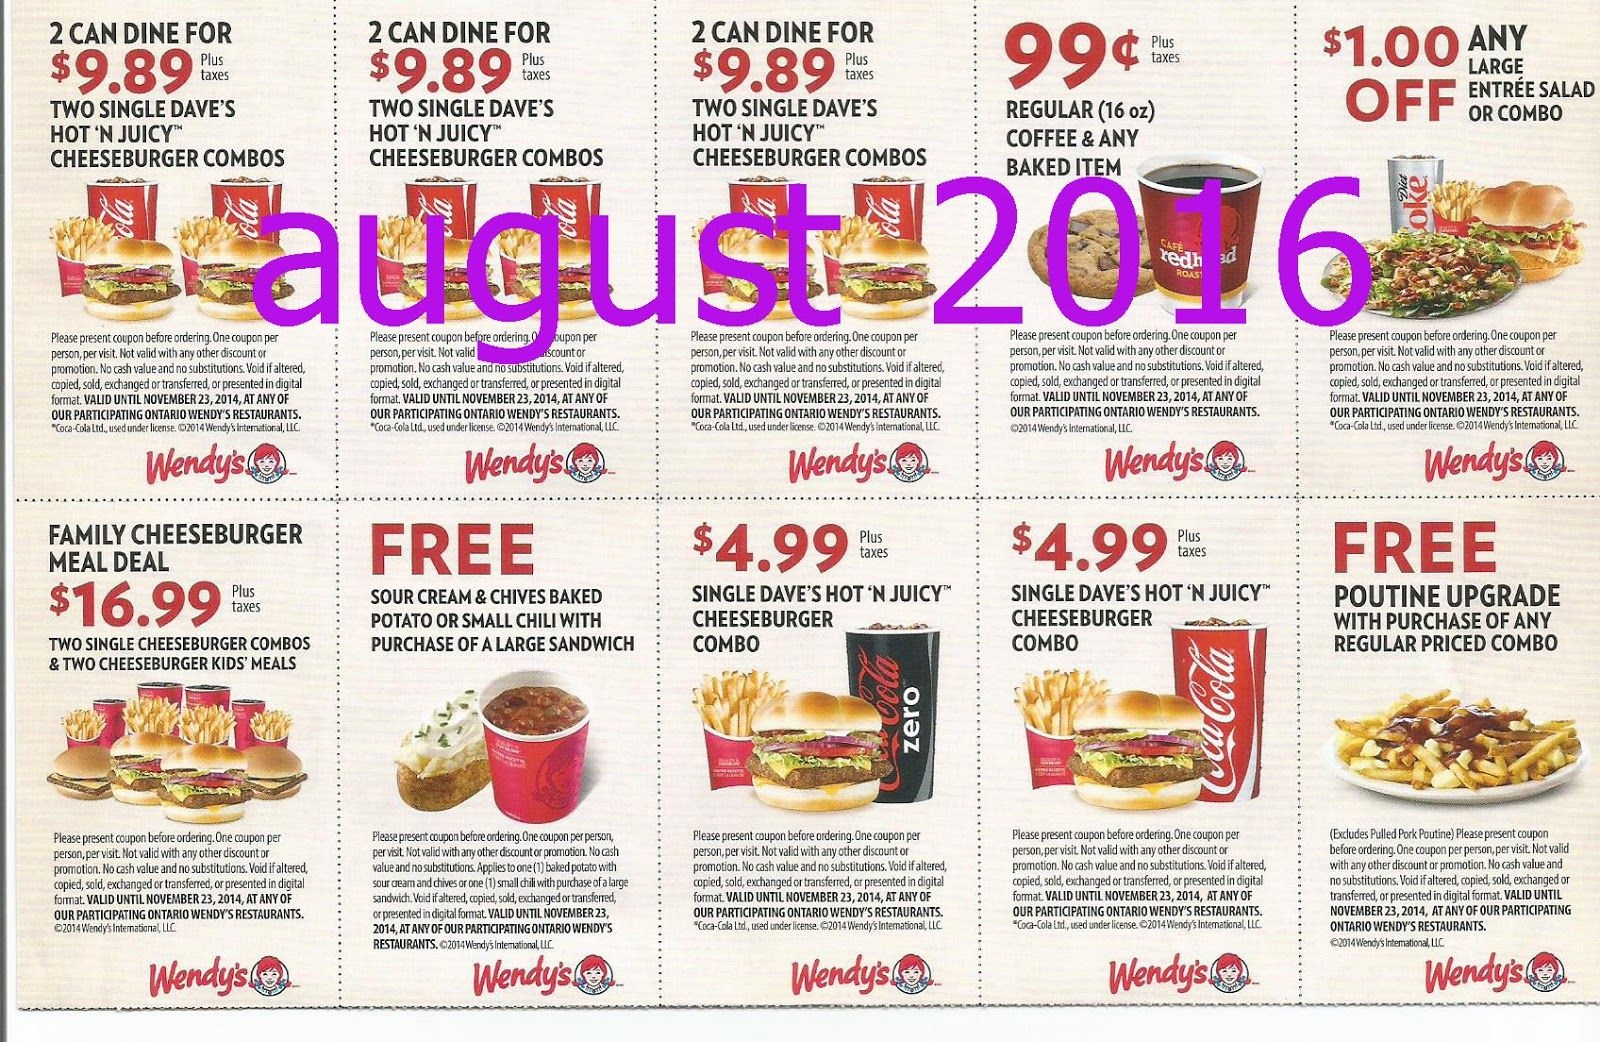 Free Printable Coupons: Wendys Coupons | Fast Food Coupons | Wendys - Free Printable Coupons Ontario